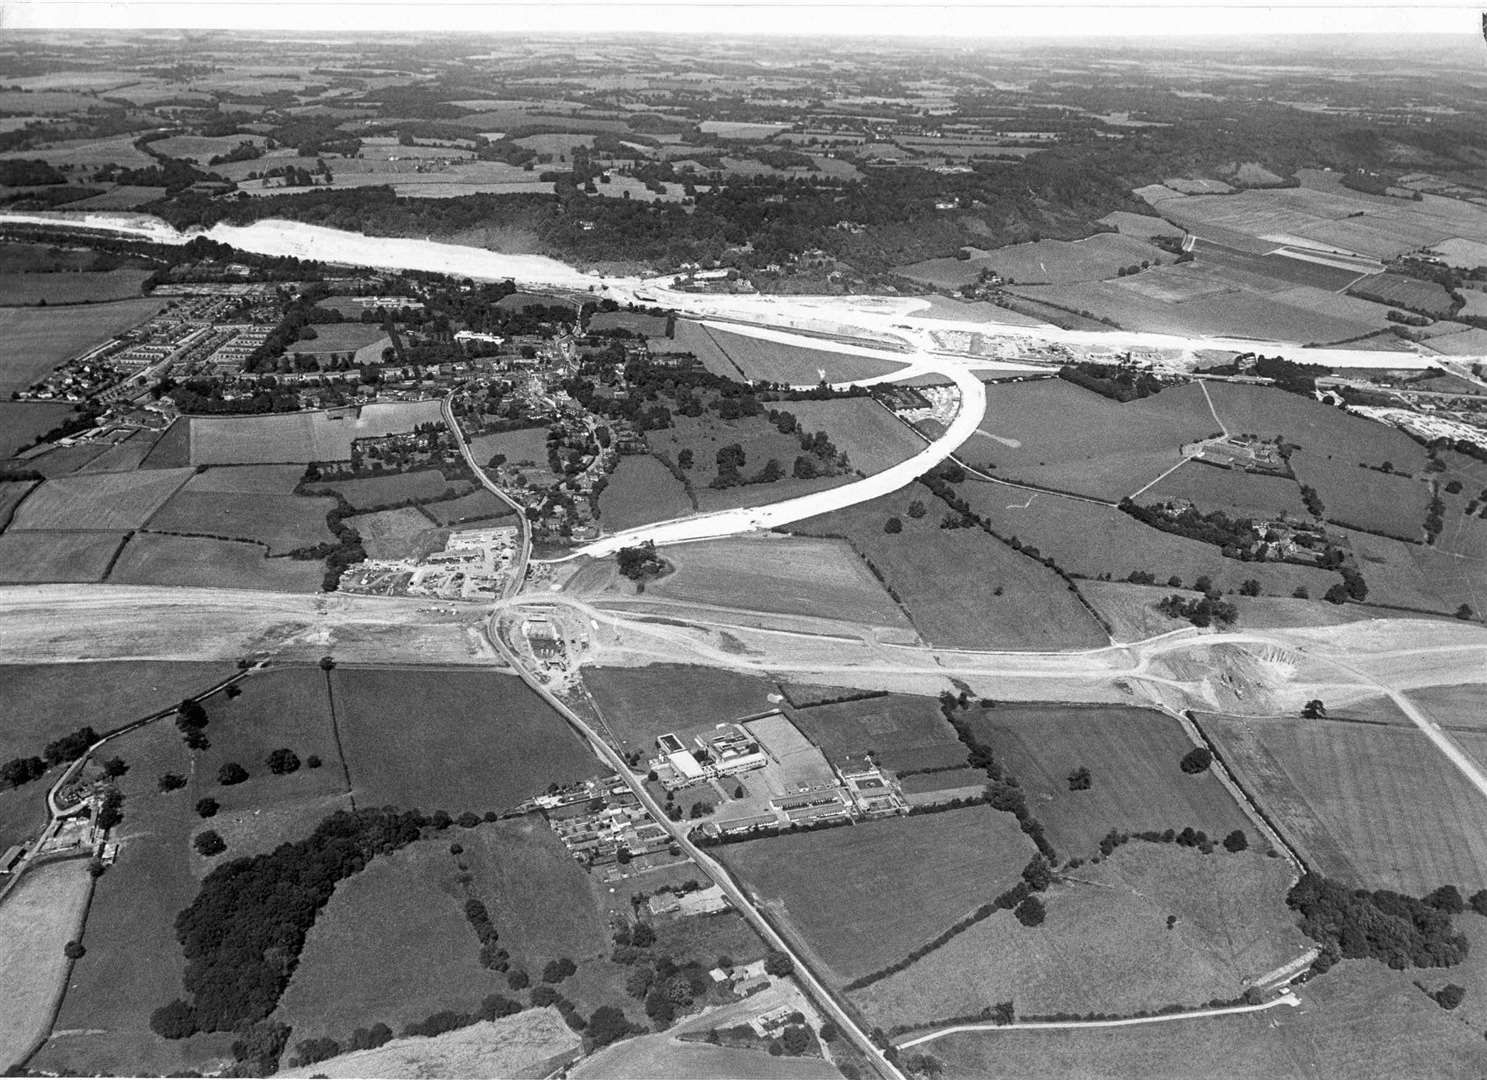 The M26 under construction in 1978. The M20 can be seen in the background, joined by the Wrotham bypass